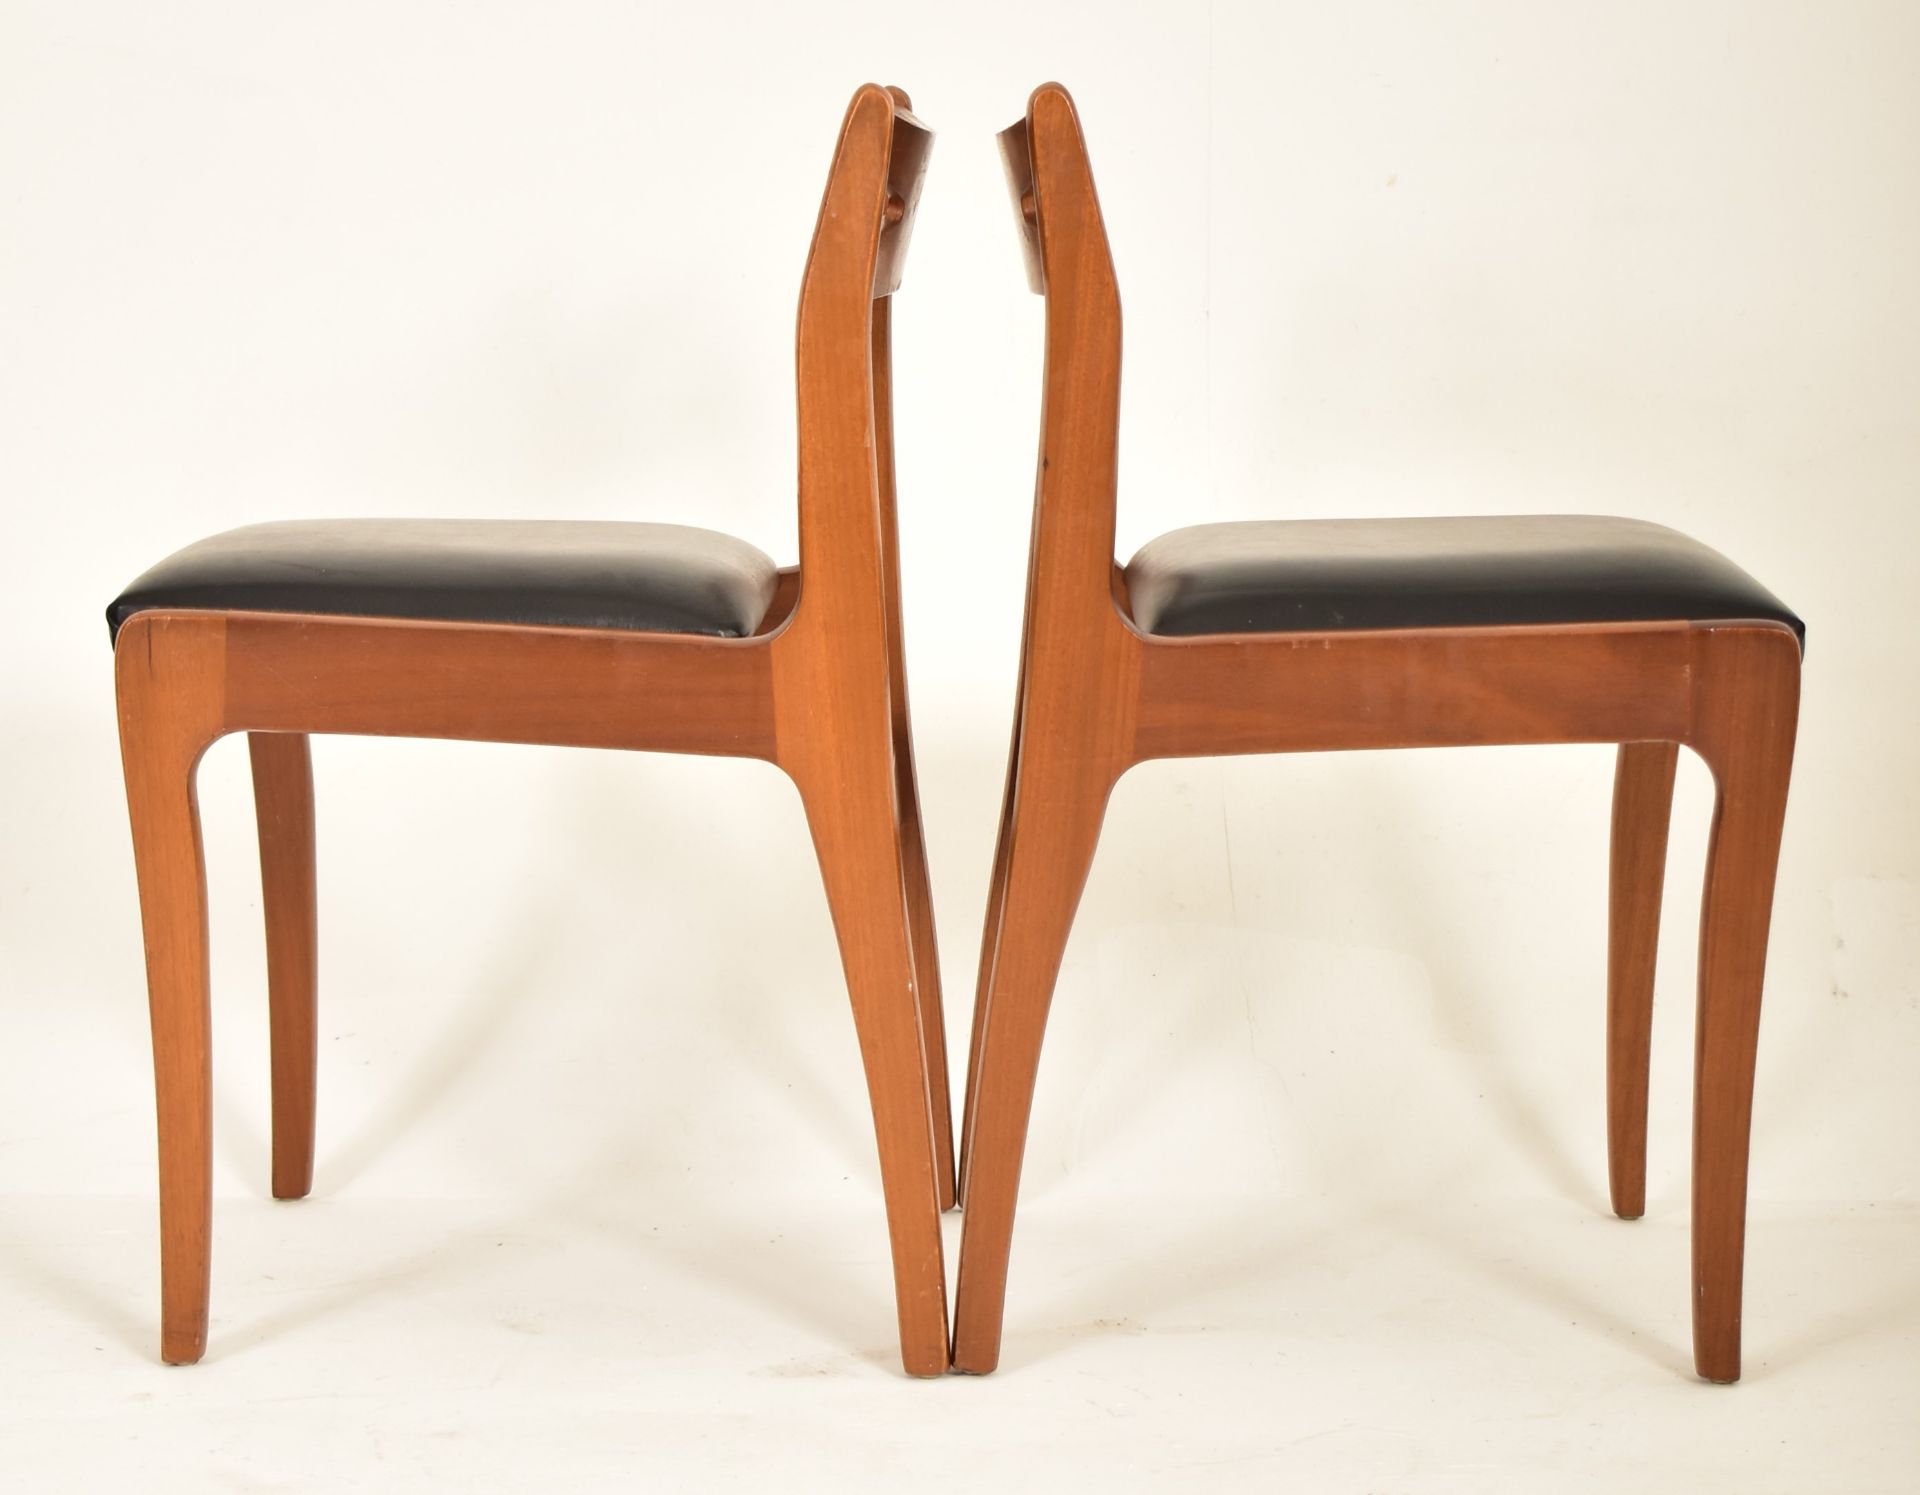 NATHAN FURNITURE - SET OF FOUR TEAK FRAMED DINING CHAIRS - Image 4 of 5